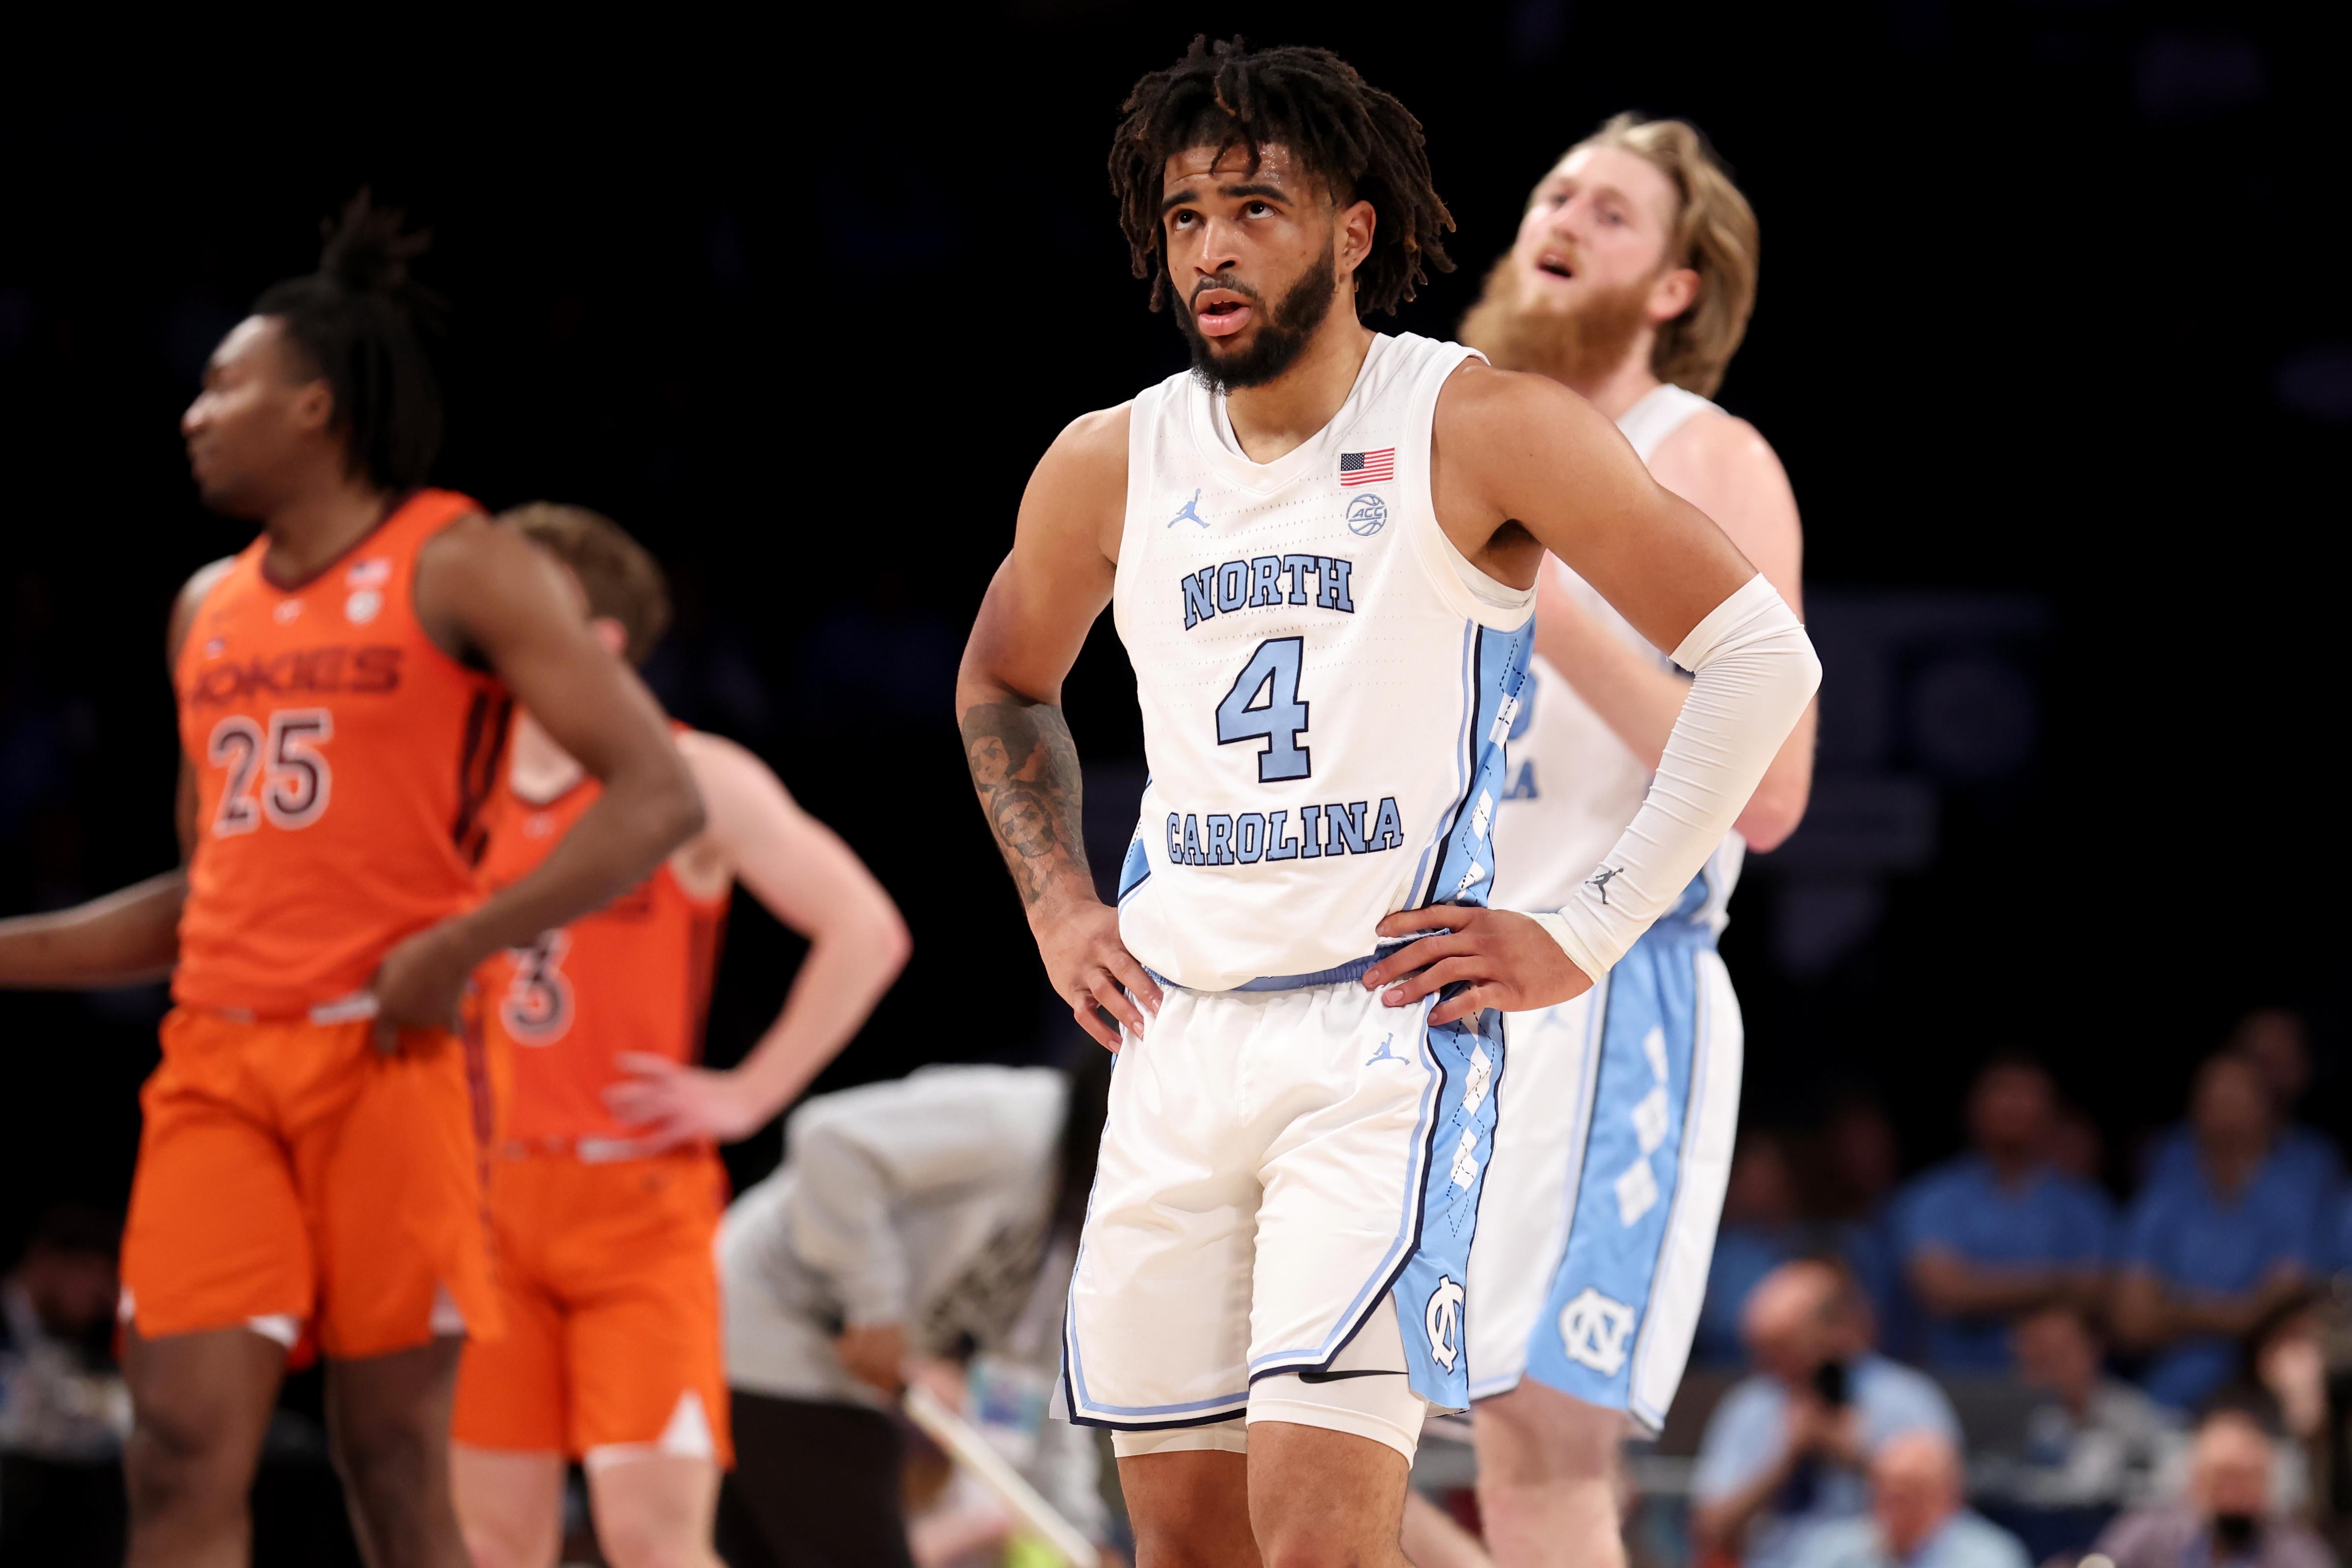 UNC March Madness Schedule Next Game Time, Date, TV Channel for 2022 NCAA Basketball Tournament (Updated) FanDuel Research